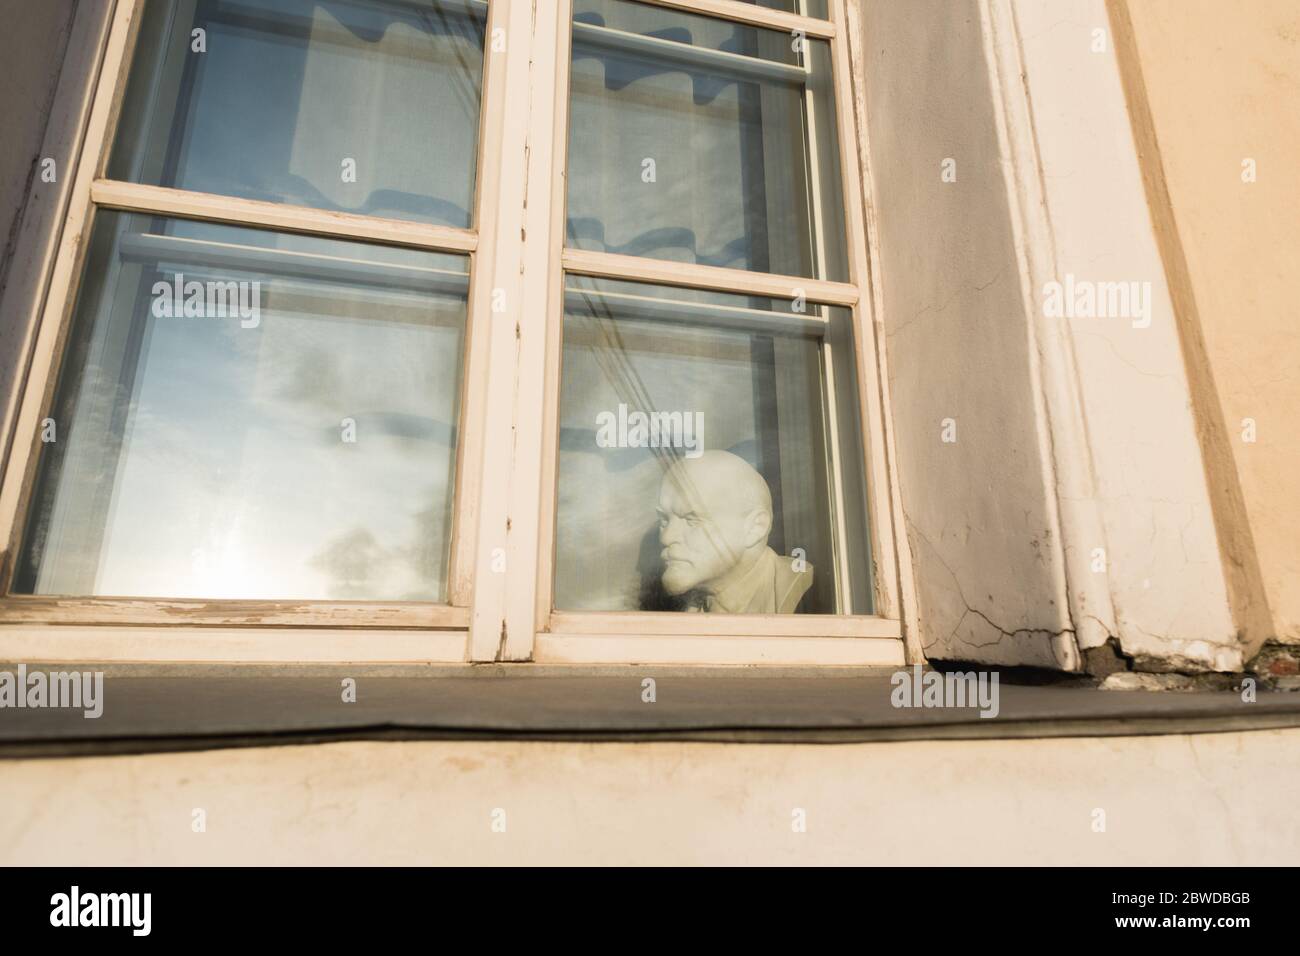 Saint Petersburg, Russia - March 25, 2020: a plaster bust of Vladimir Lenin in a window of a house in Fontanka Embankment. Stock Photo